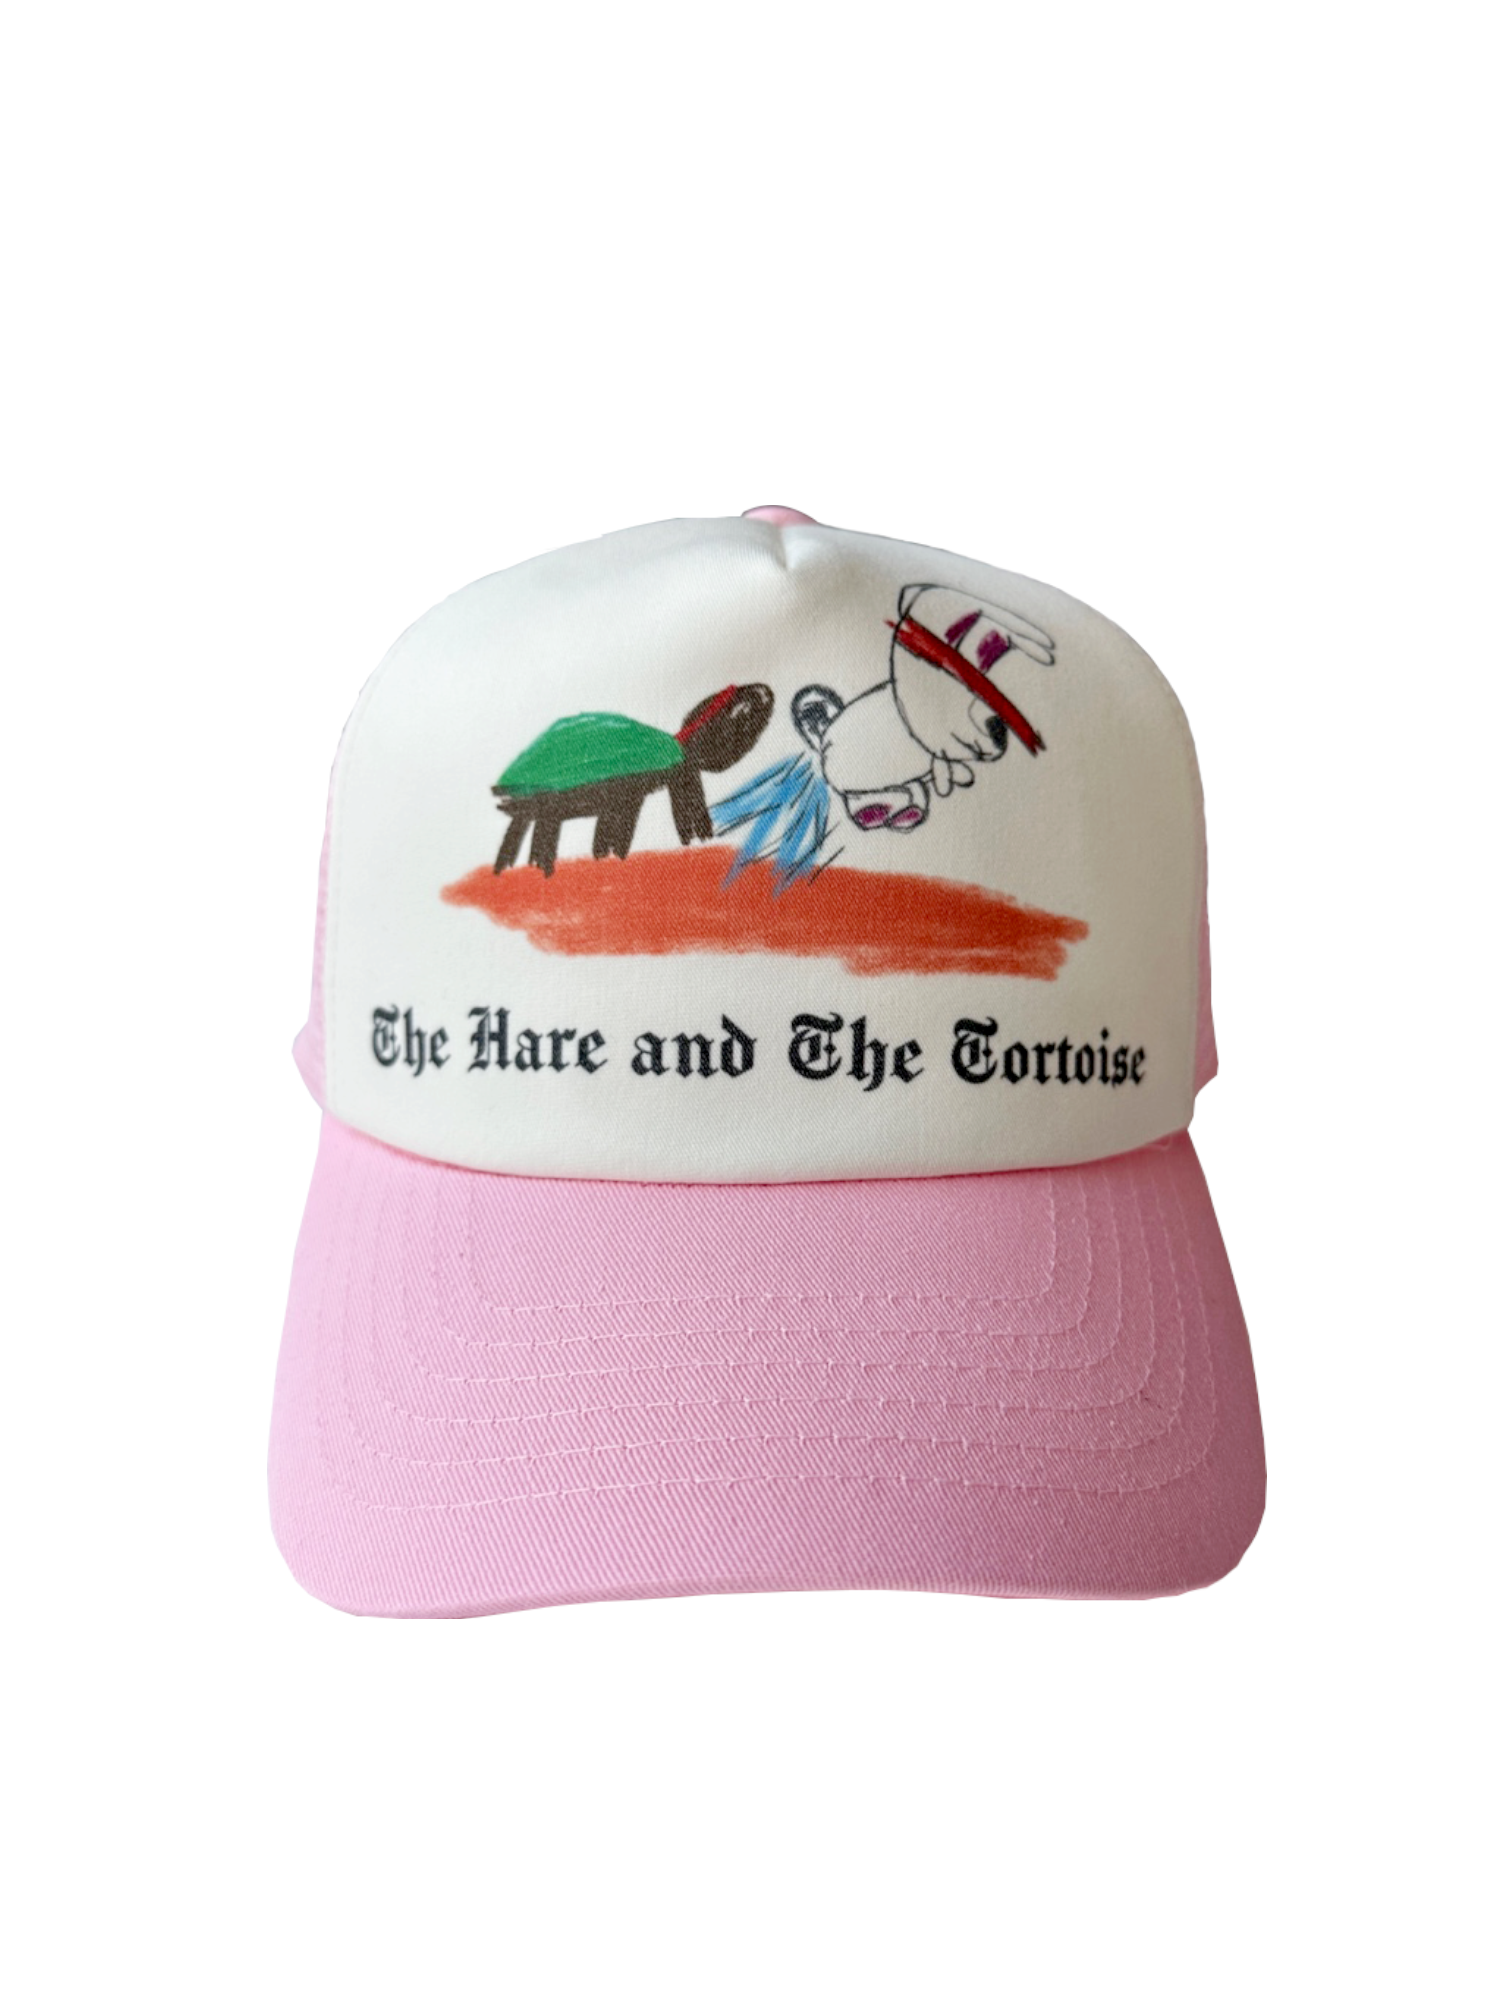 The Hare and Tortoise Trucker Cap - Pink